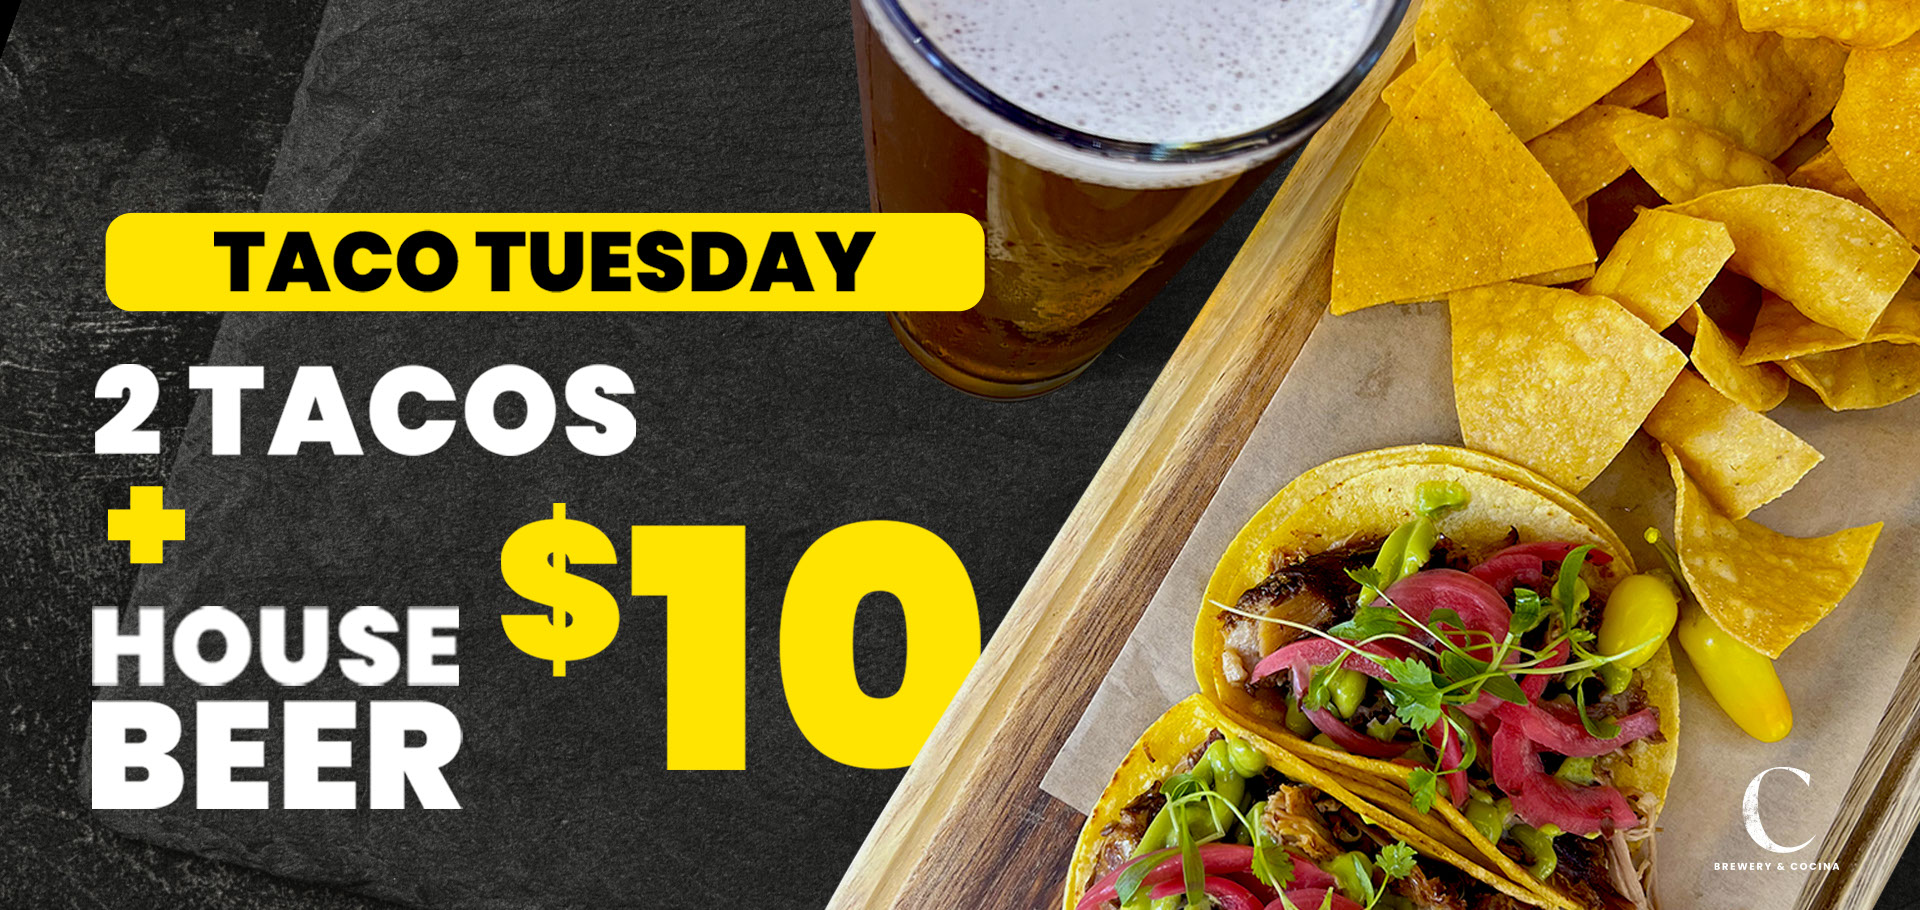 Taco Tuesday - 2 Tacos + House Beer - $10